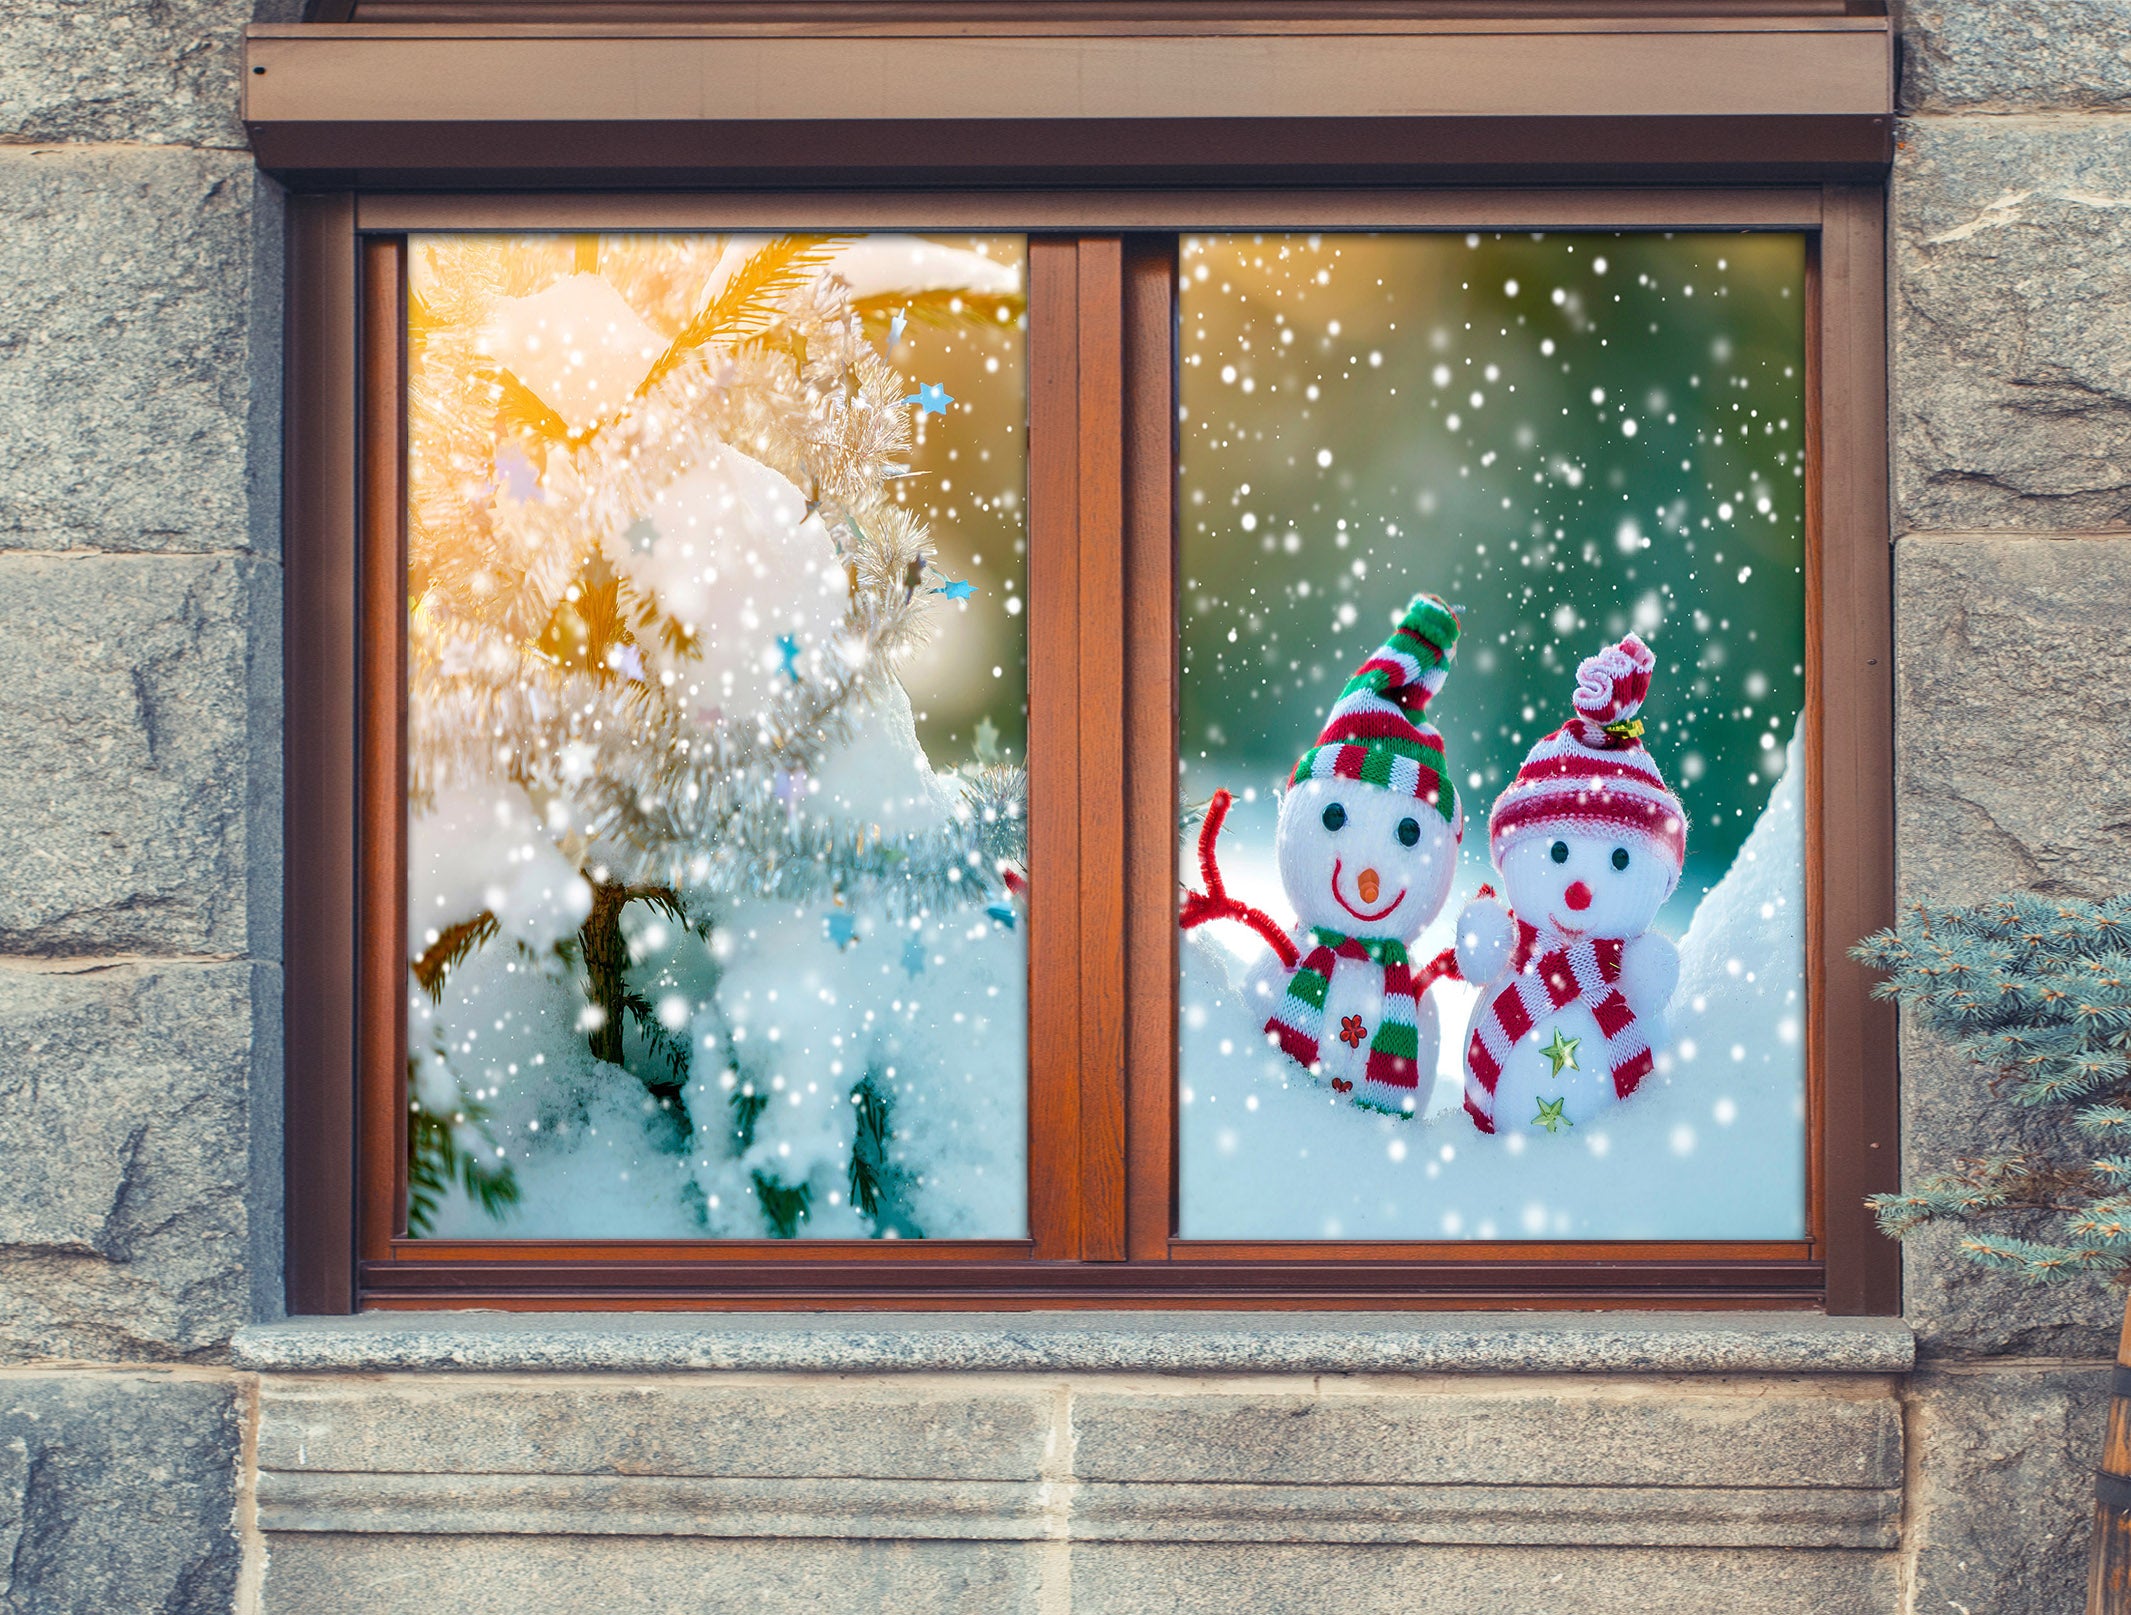 3D Snowman 30076 Christmas Window Film Print Sticker Cling Stained Glass Xmas